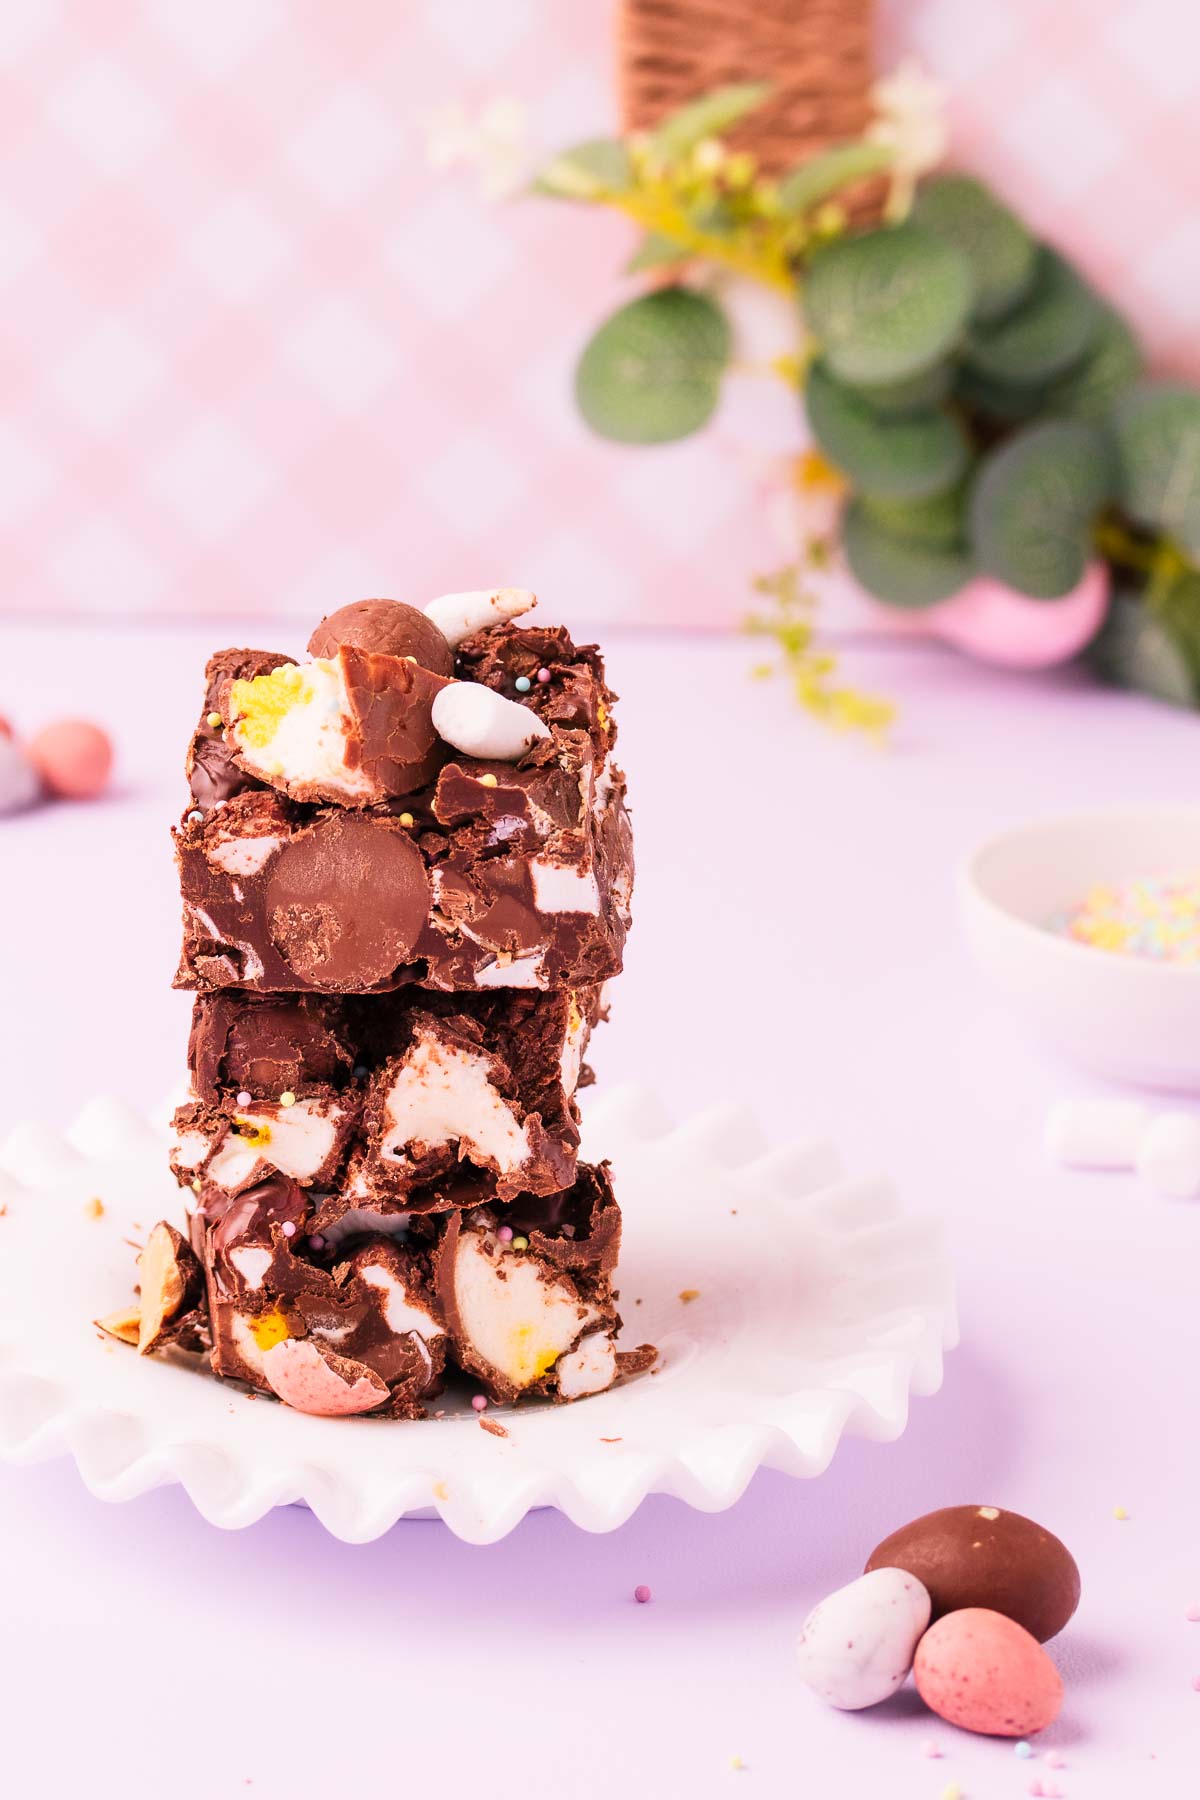 Three stacked pieces of rocky road on a white milk glass plate, with an Easter wreath behind it on a light purple background.